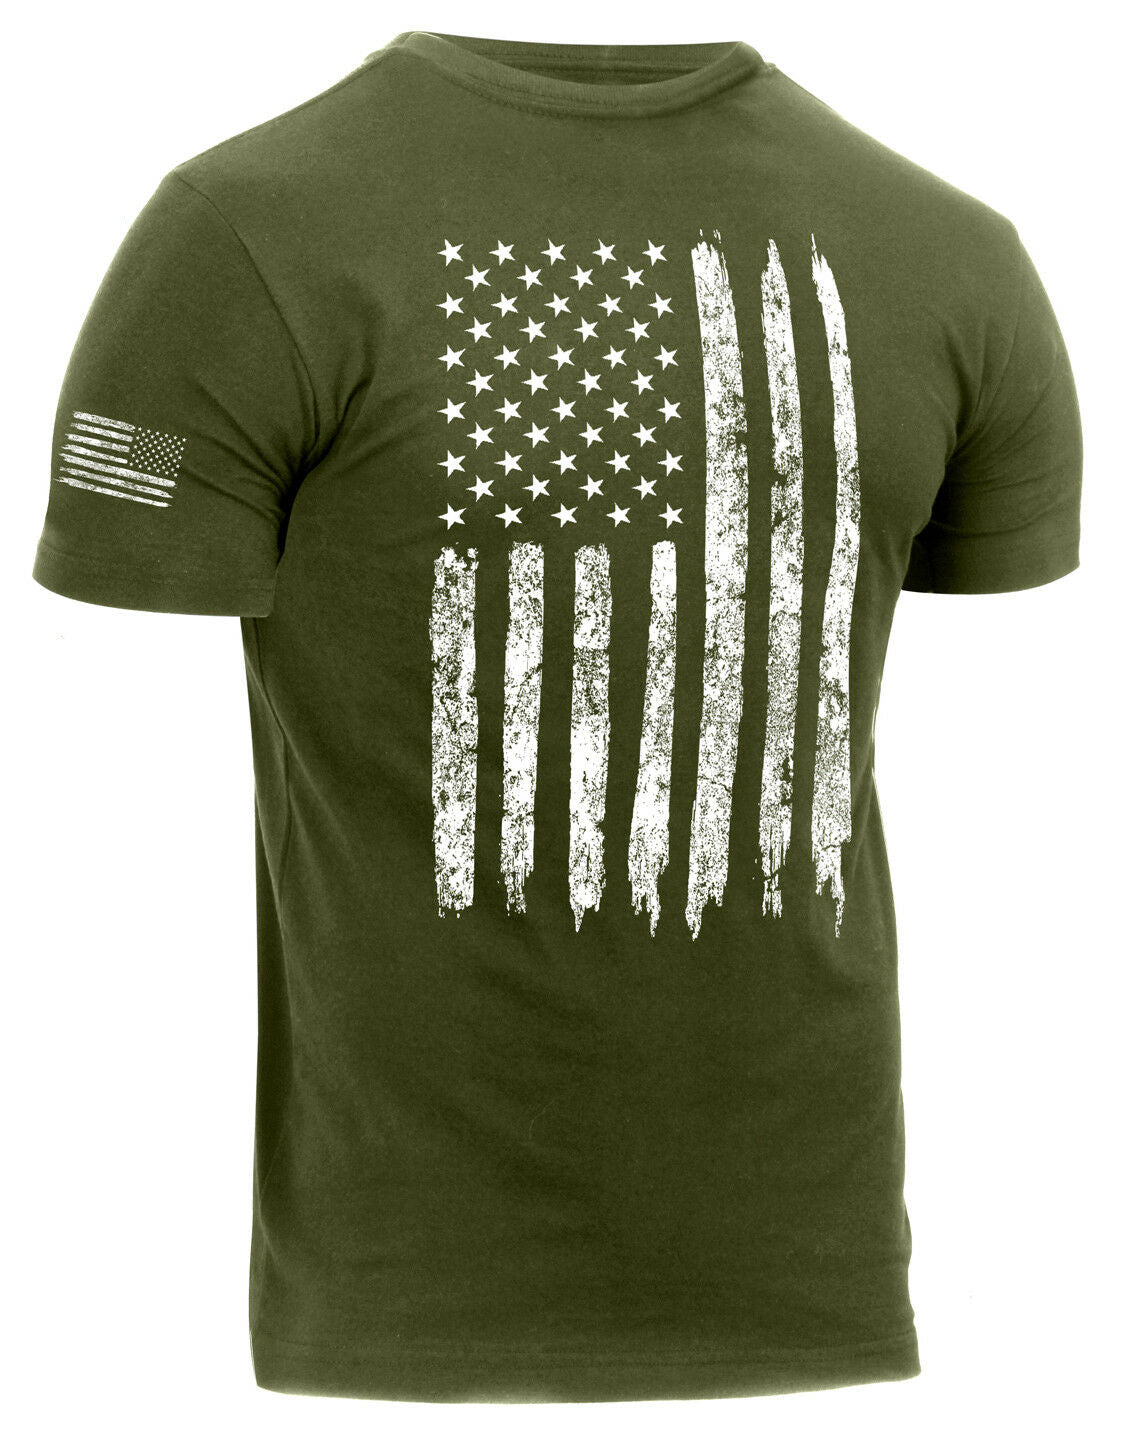 Rothco Distressed US Flag Athletic Fit T-Shirt - Olive Drab Green